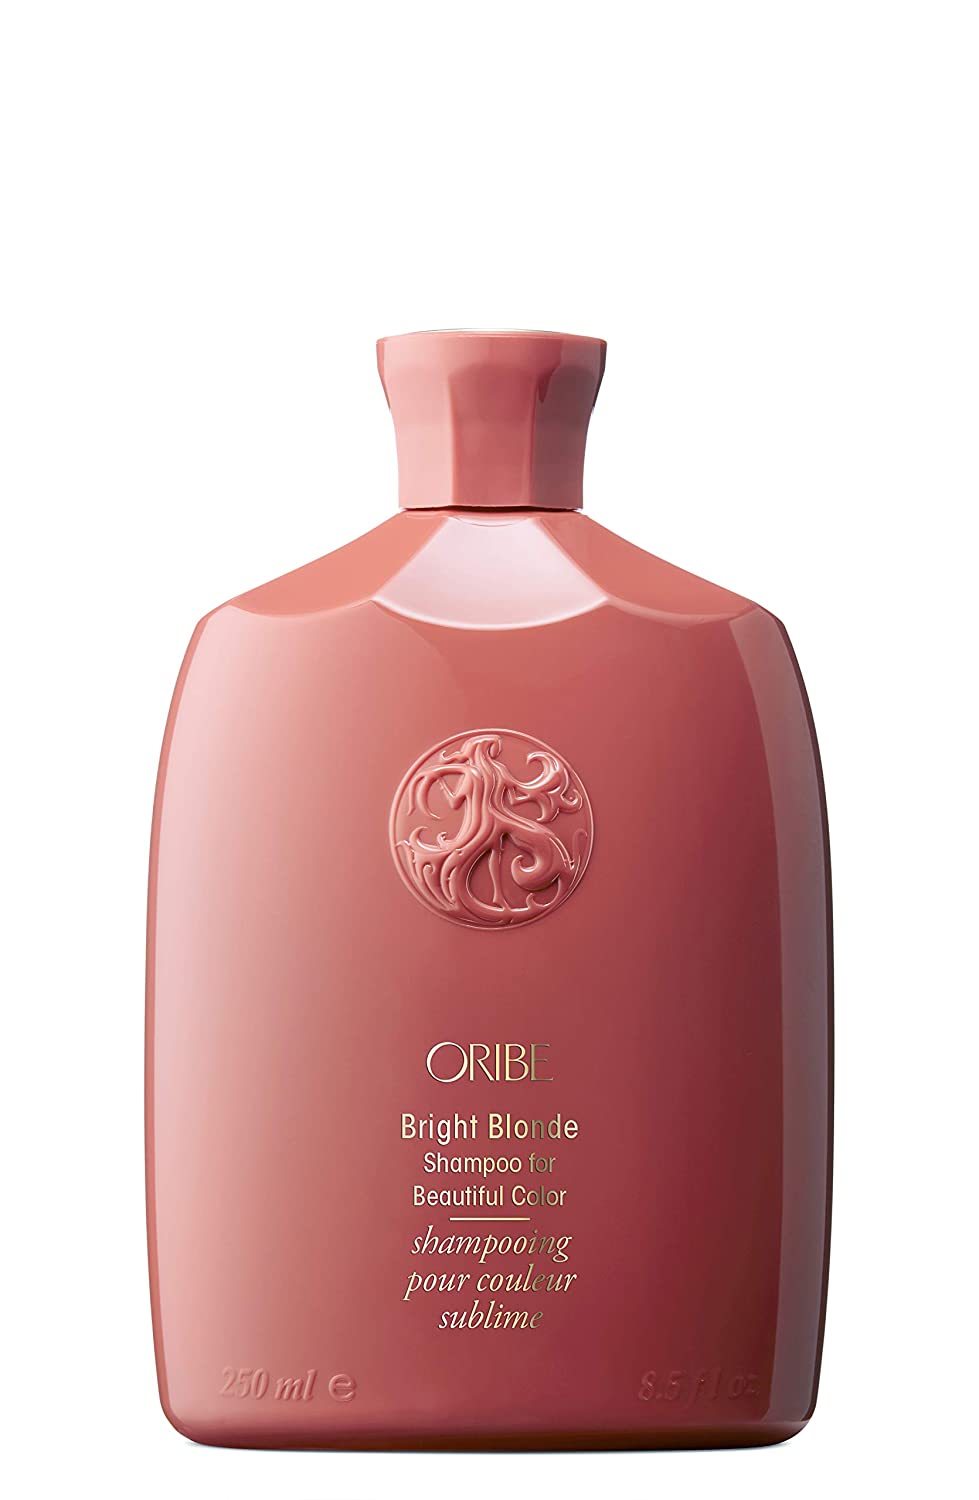  5. Oribe Bright Blonde Shampoo for Beautiful Color is the best shampoo for blonde hair. 